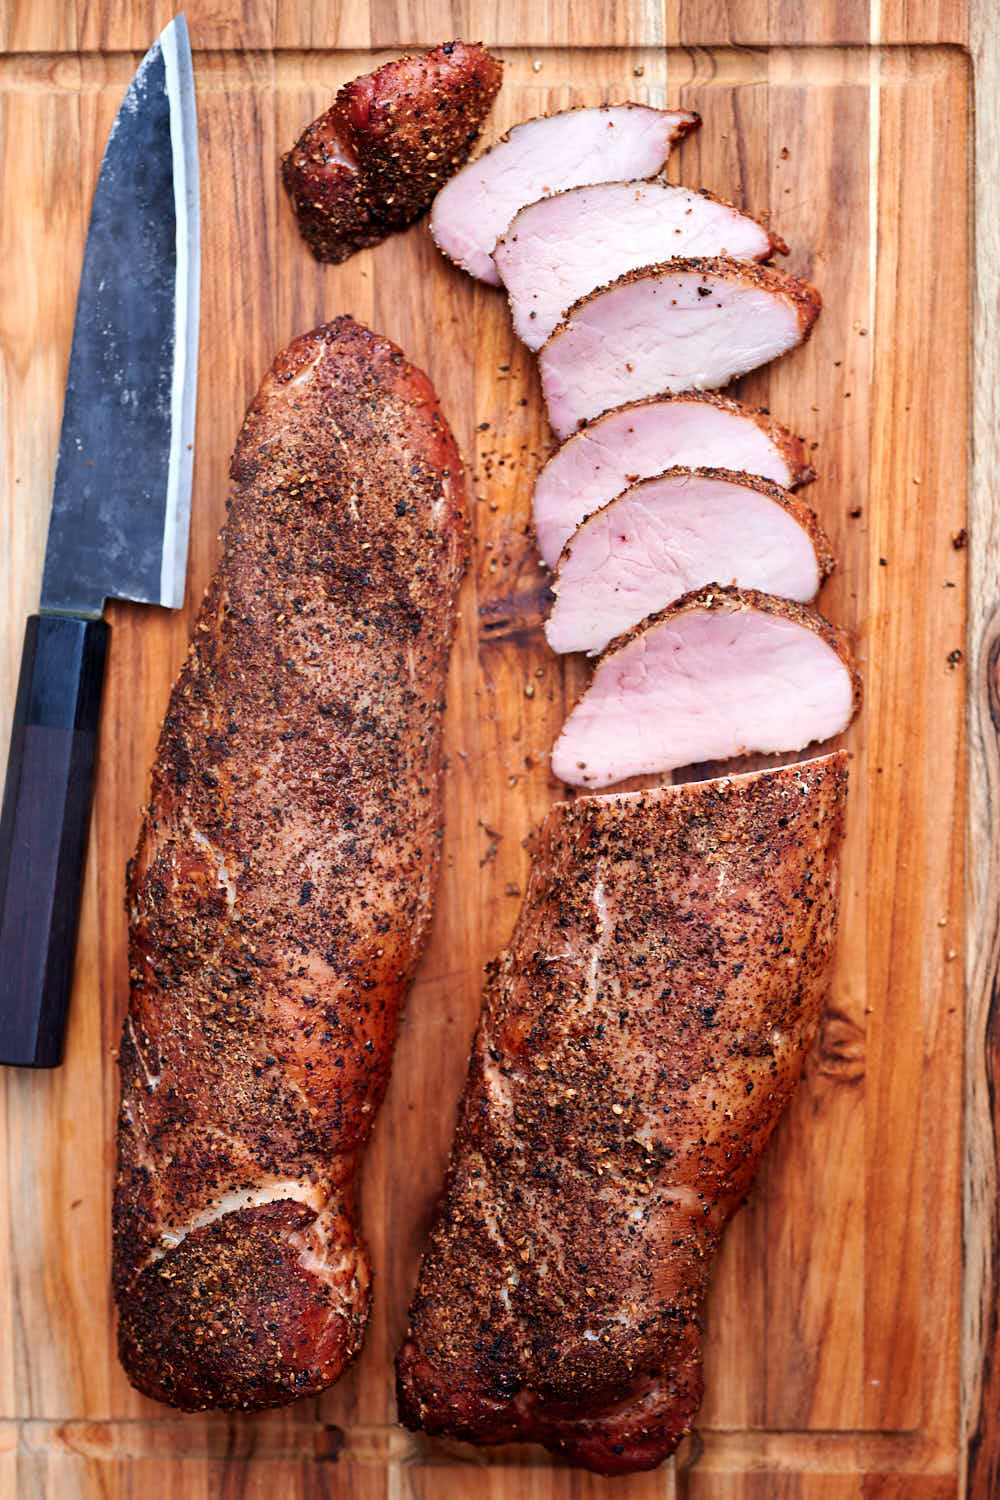 Top down view of two pork tenderloins, one partially sliced, on a board.